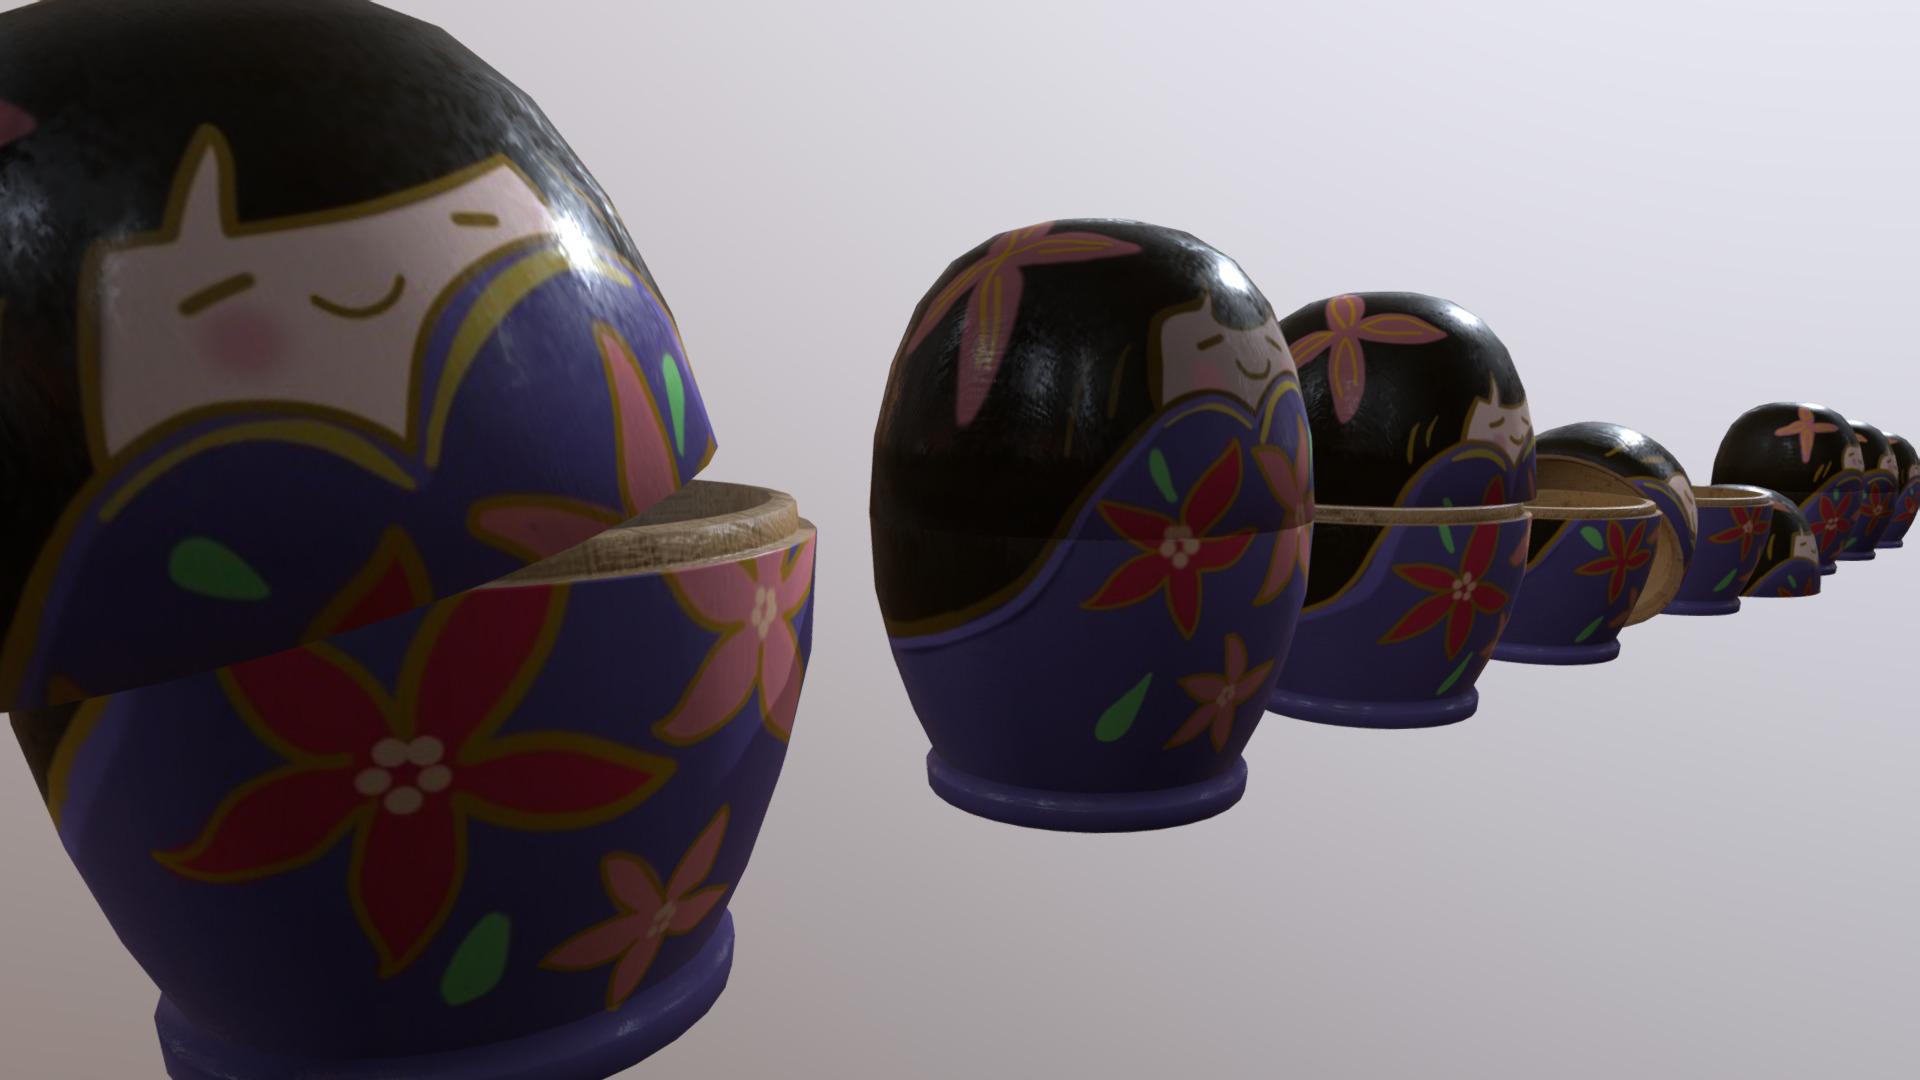 3D model Matryoshka – Kokeshi – Decor Object - This is a 3D model of the Matryoshka - Kokeshi - Decor Object. The 3D model is about a group of painted eggs.